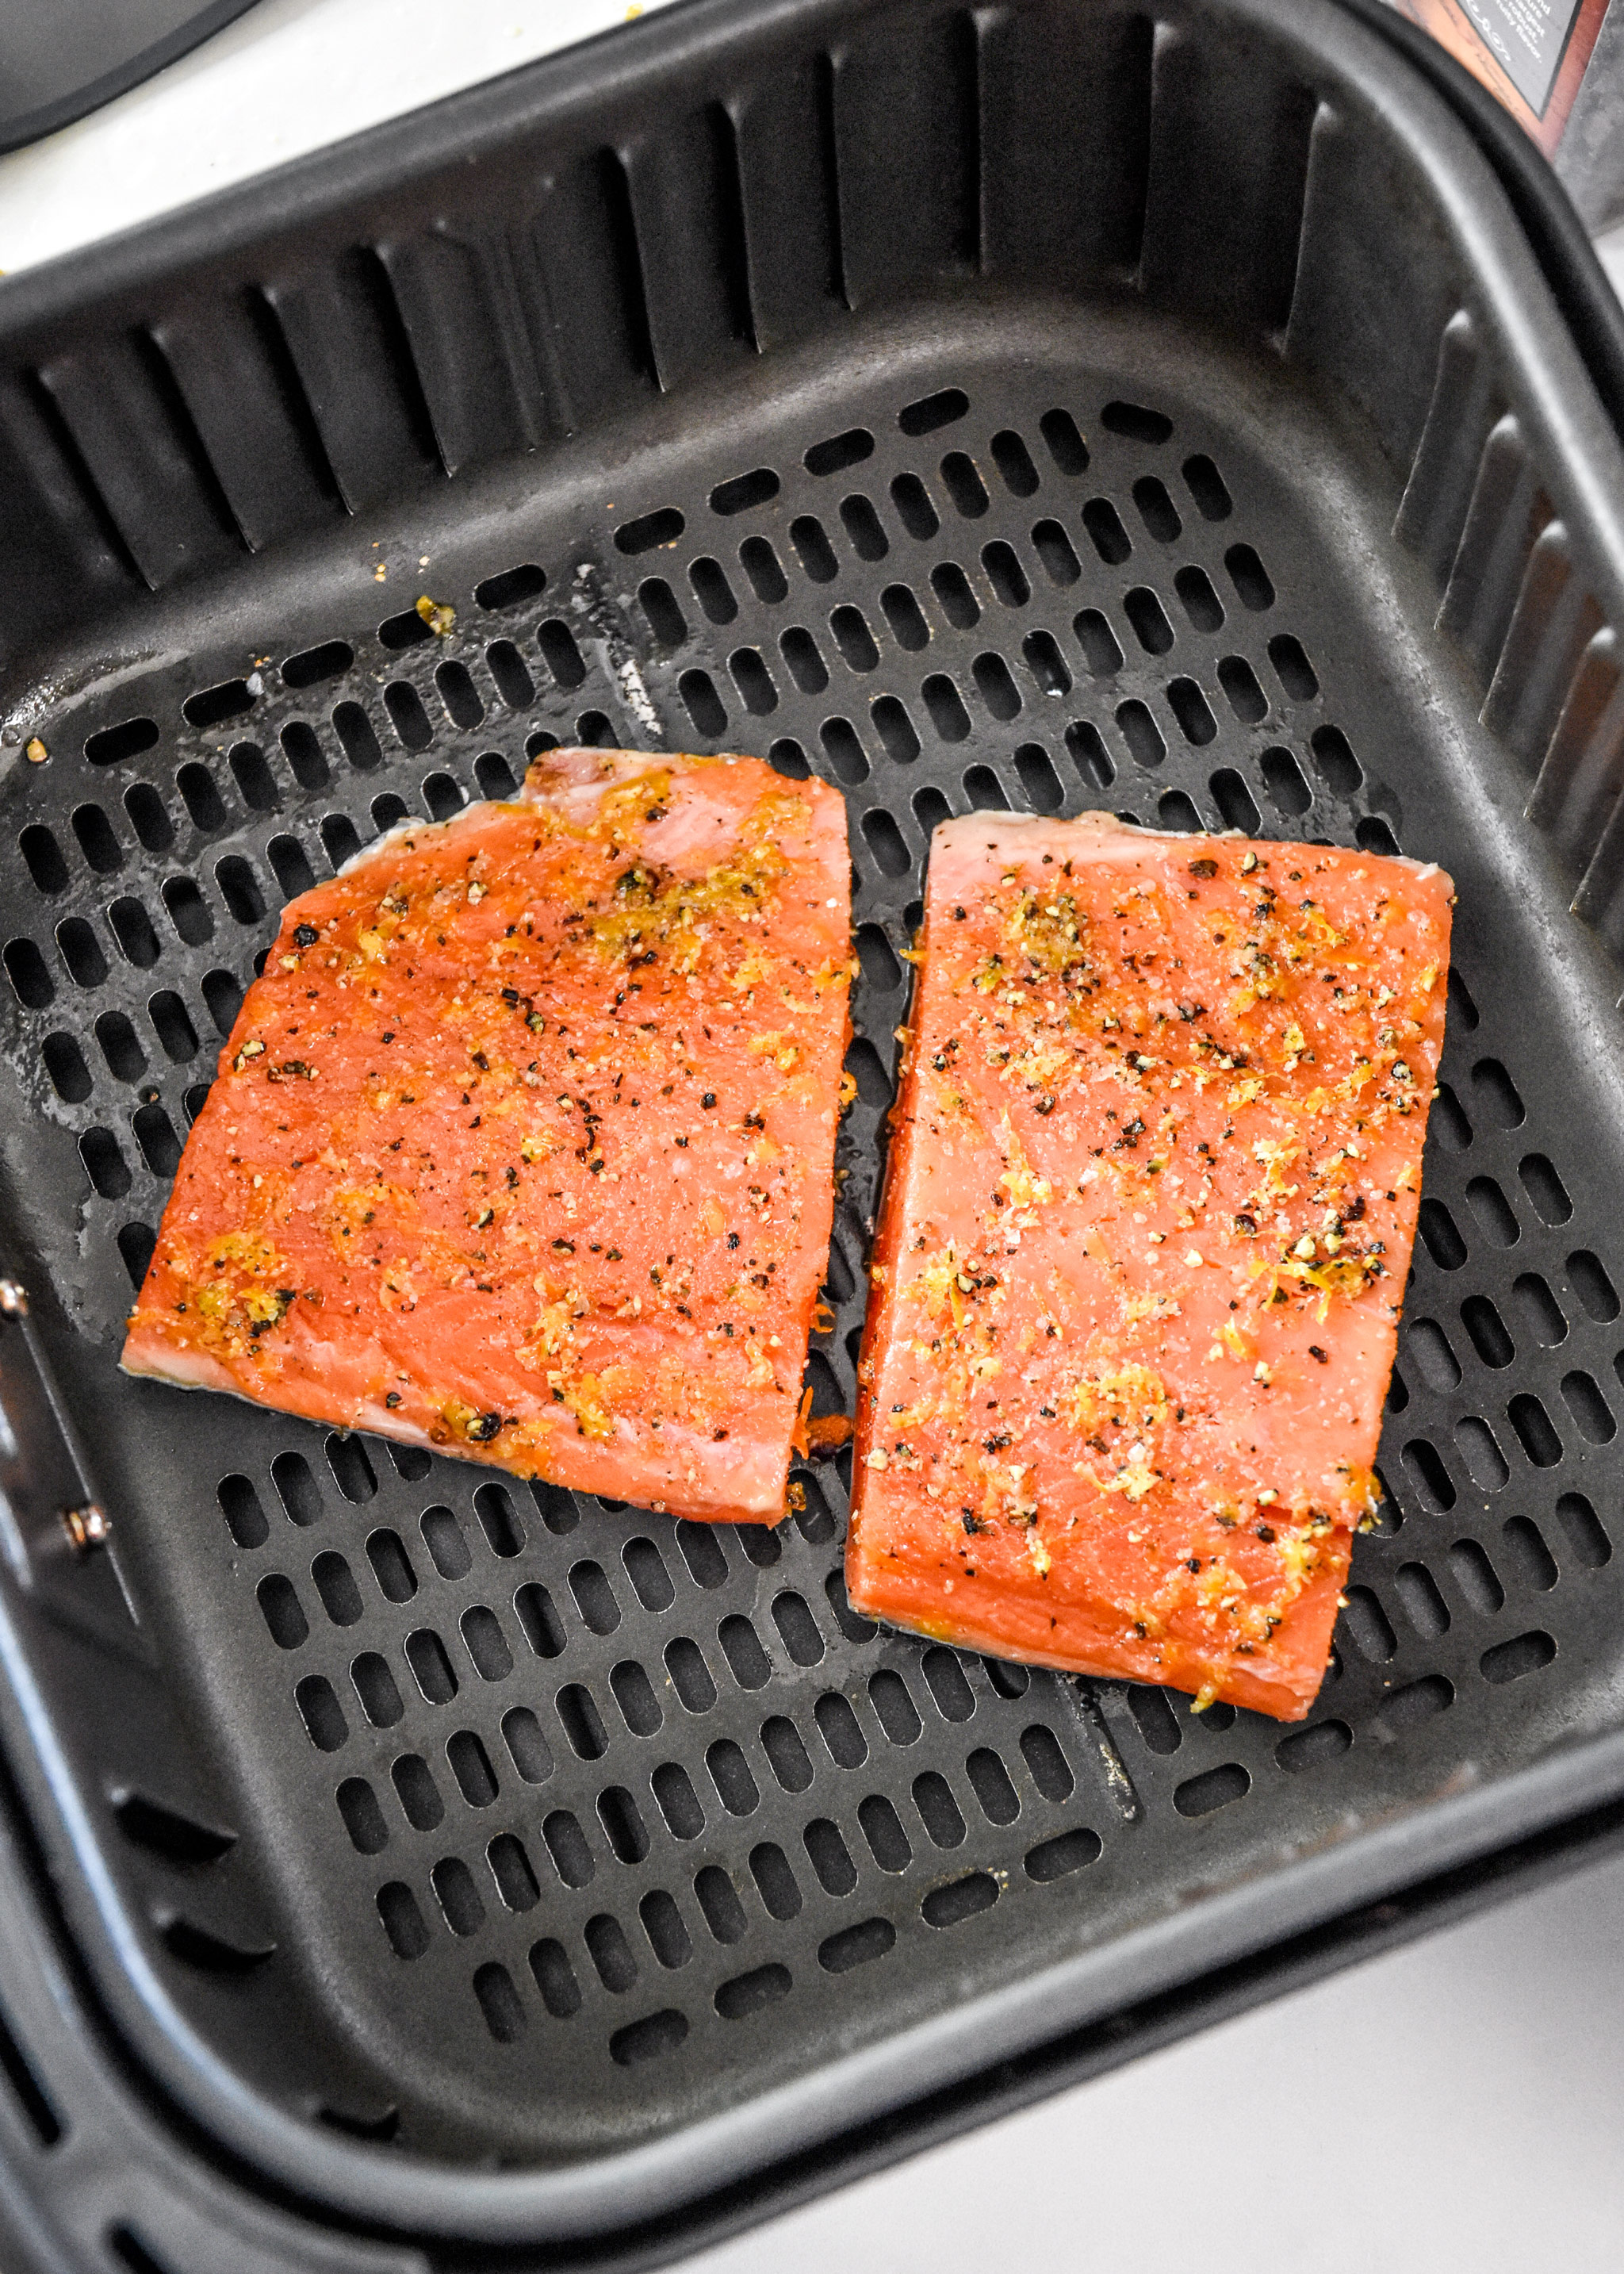 raw salmon in the air fryer basket about to be cooked.